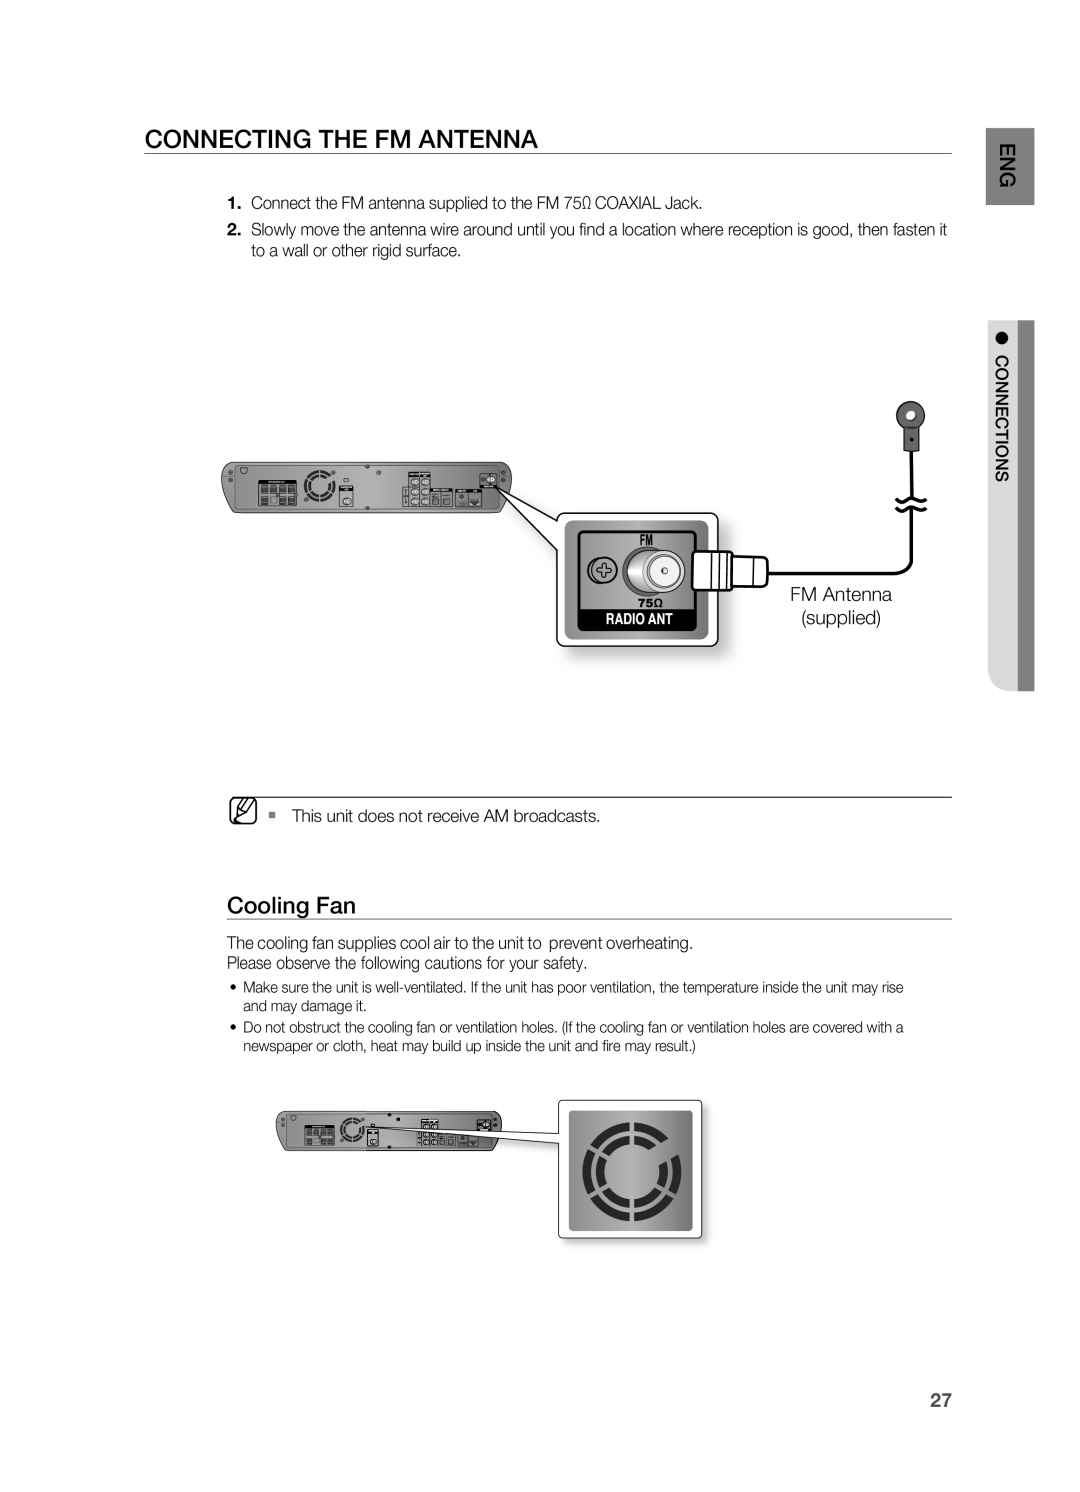 Samsung HT-BD2 manual Connecting the FM Antenna, Cooling Fan 